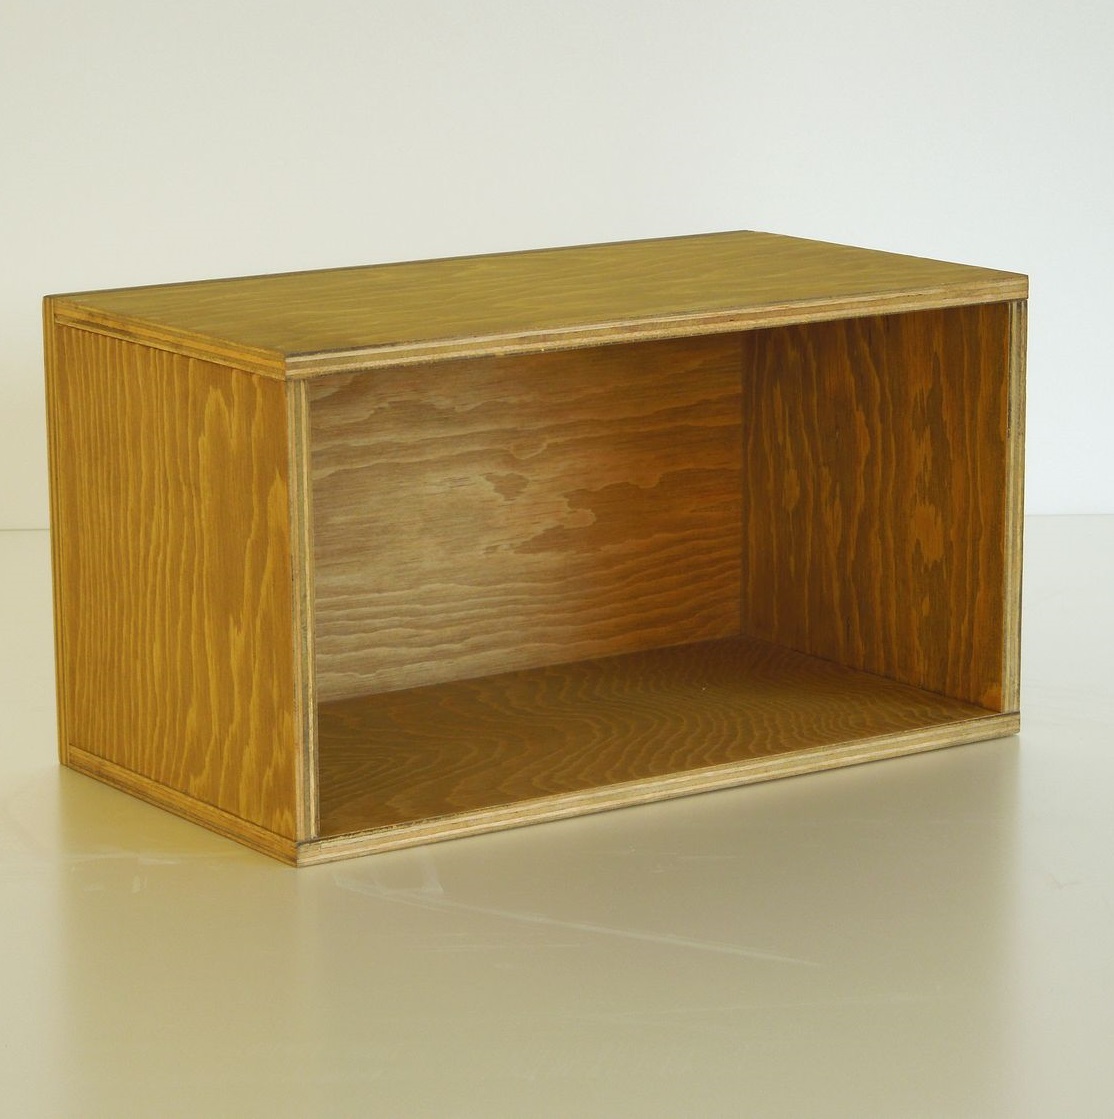 WOOD CONTAINER / CD WOOD CONTAINER (CD約20枚収納)